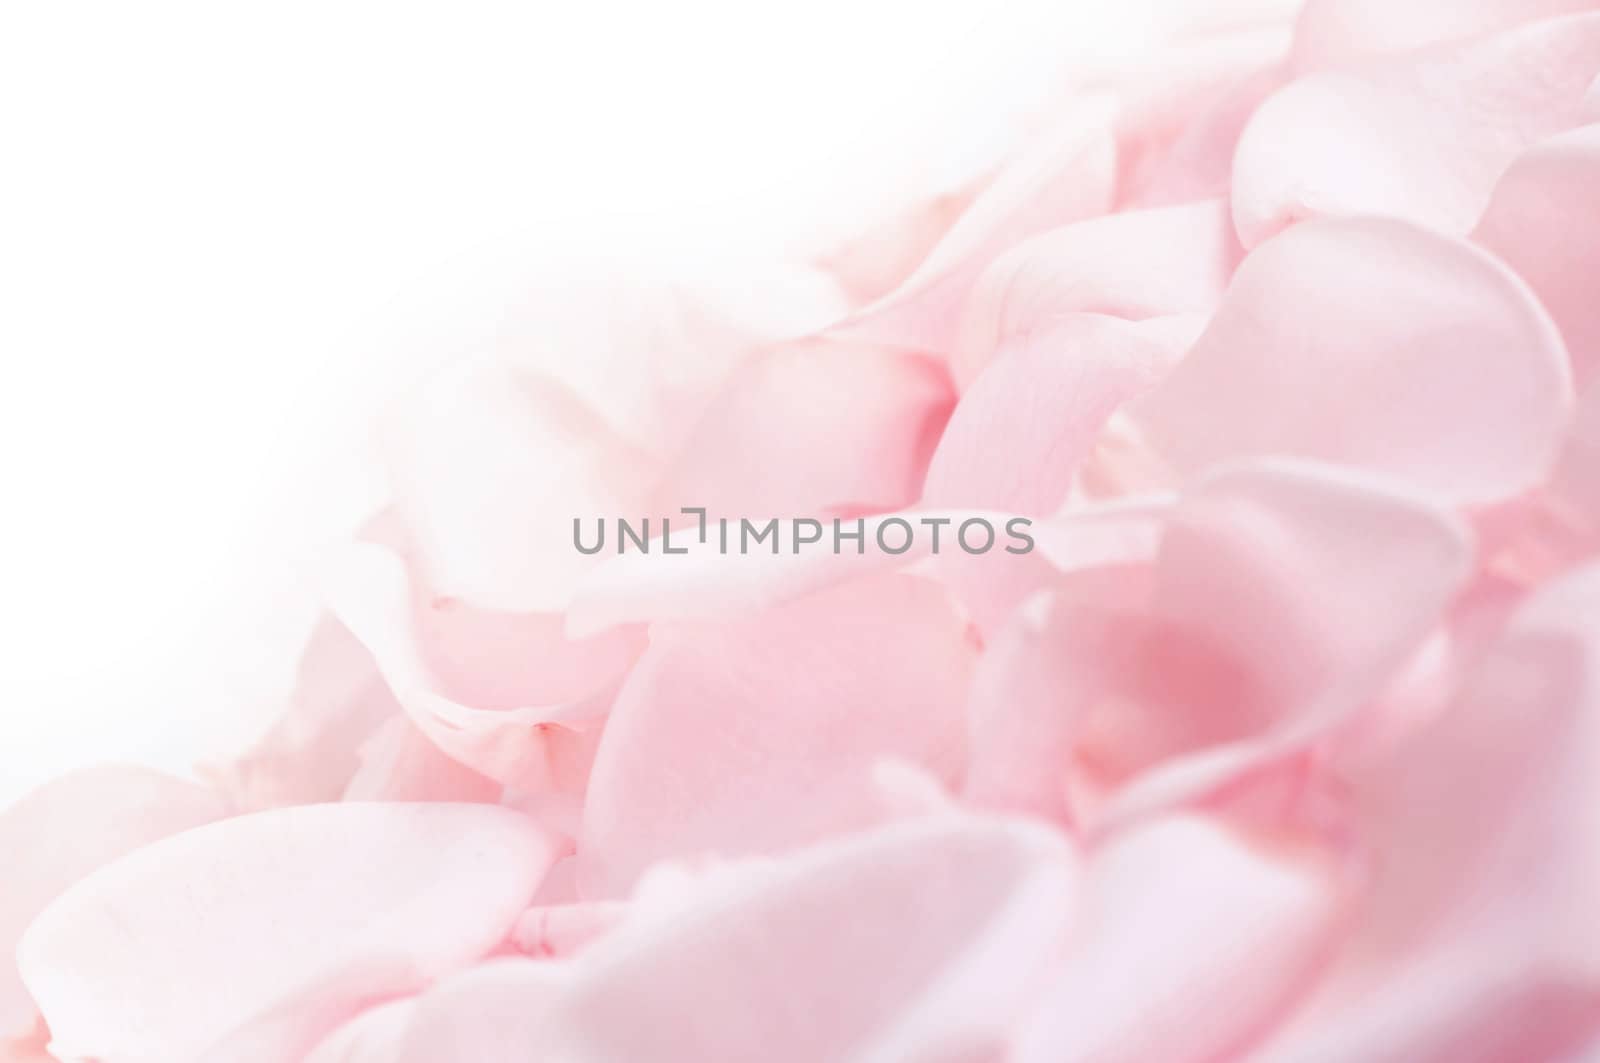 Abstract background of fresh pink rose petals